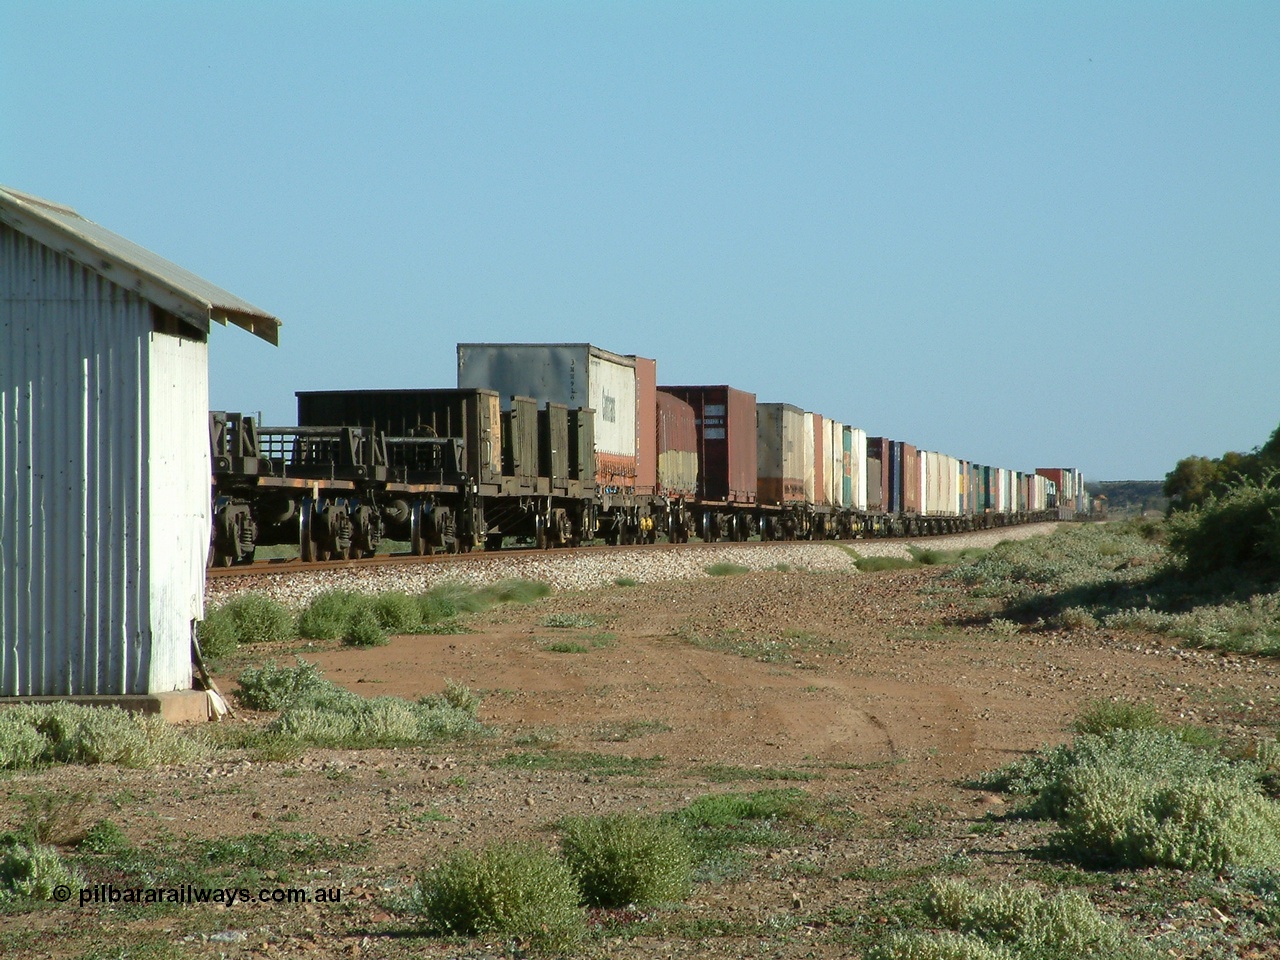 030404 082938
Port Germein, Perth bound steel and intermodal hurries through on the main behind National Rail's NR class units, showing one and a half stacking and new vehicles on flat waggons with empty steel loading on the rear. 4th April 2003.
